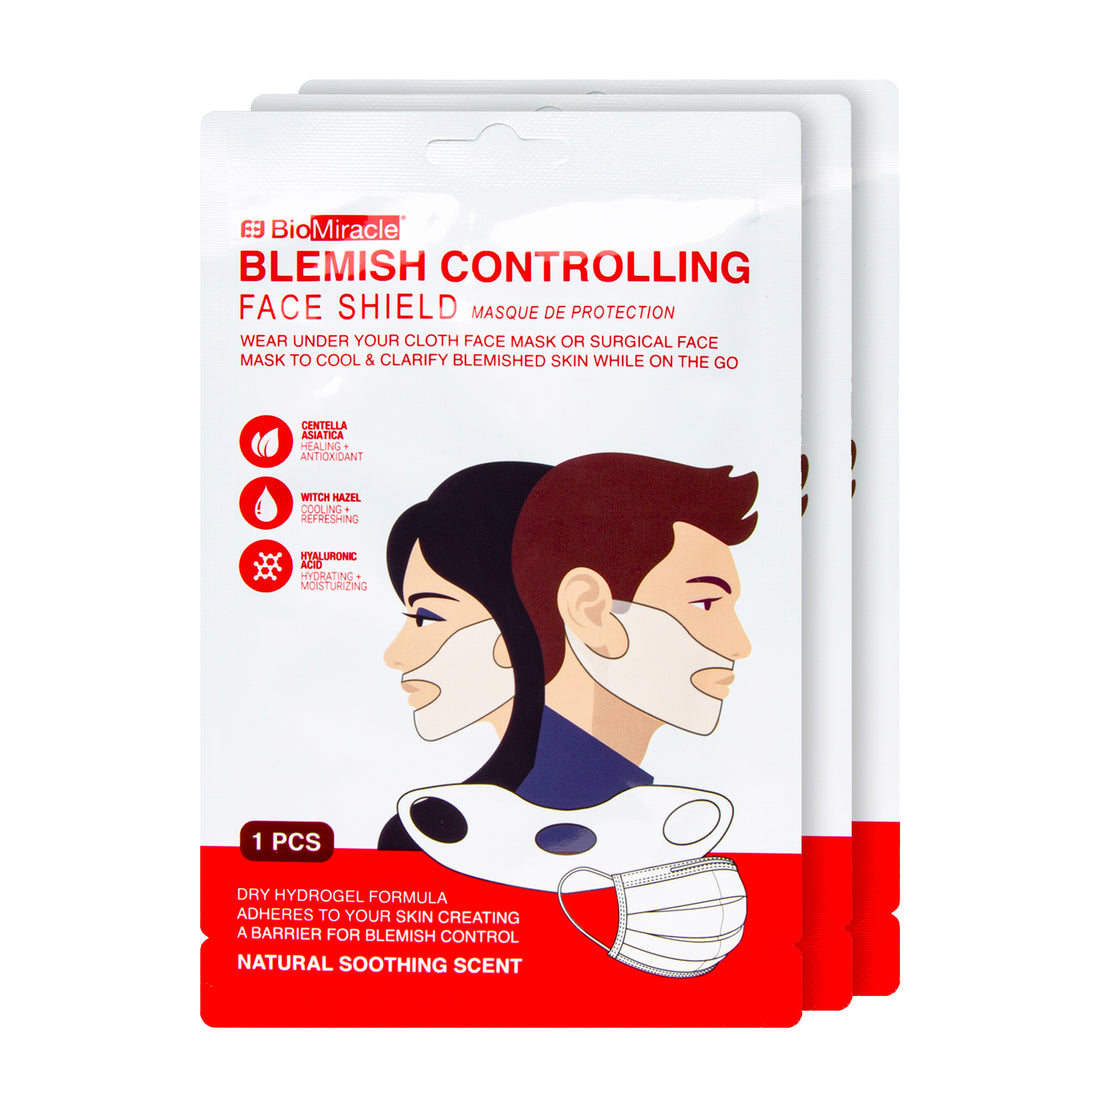 Blemish Controlling Face Shield 3 Pack